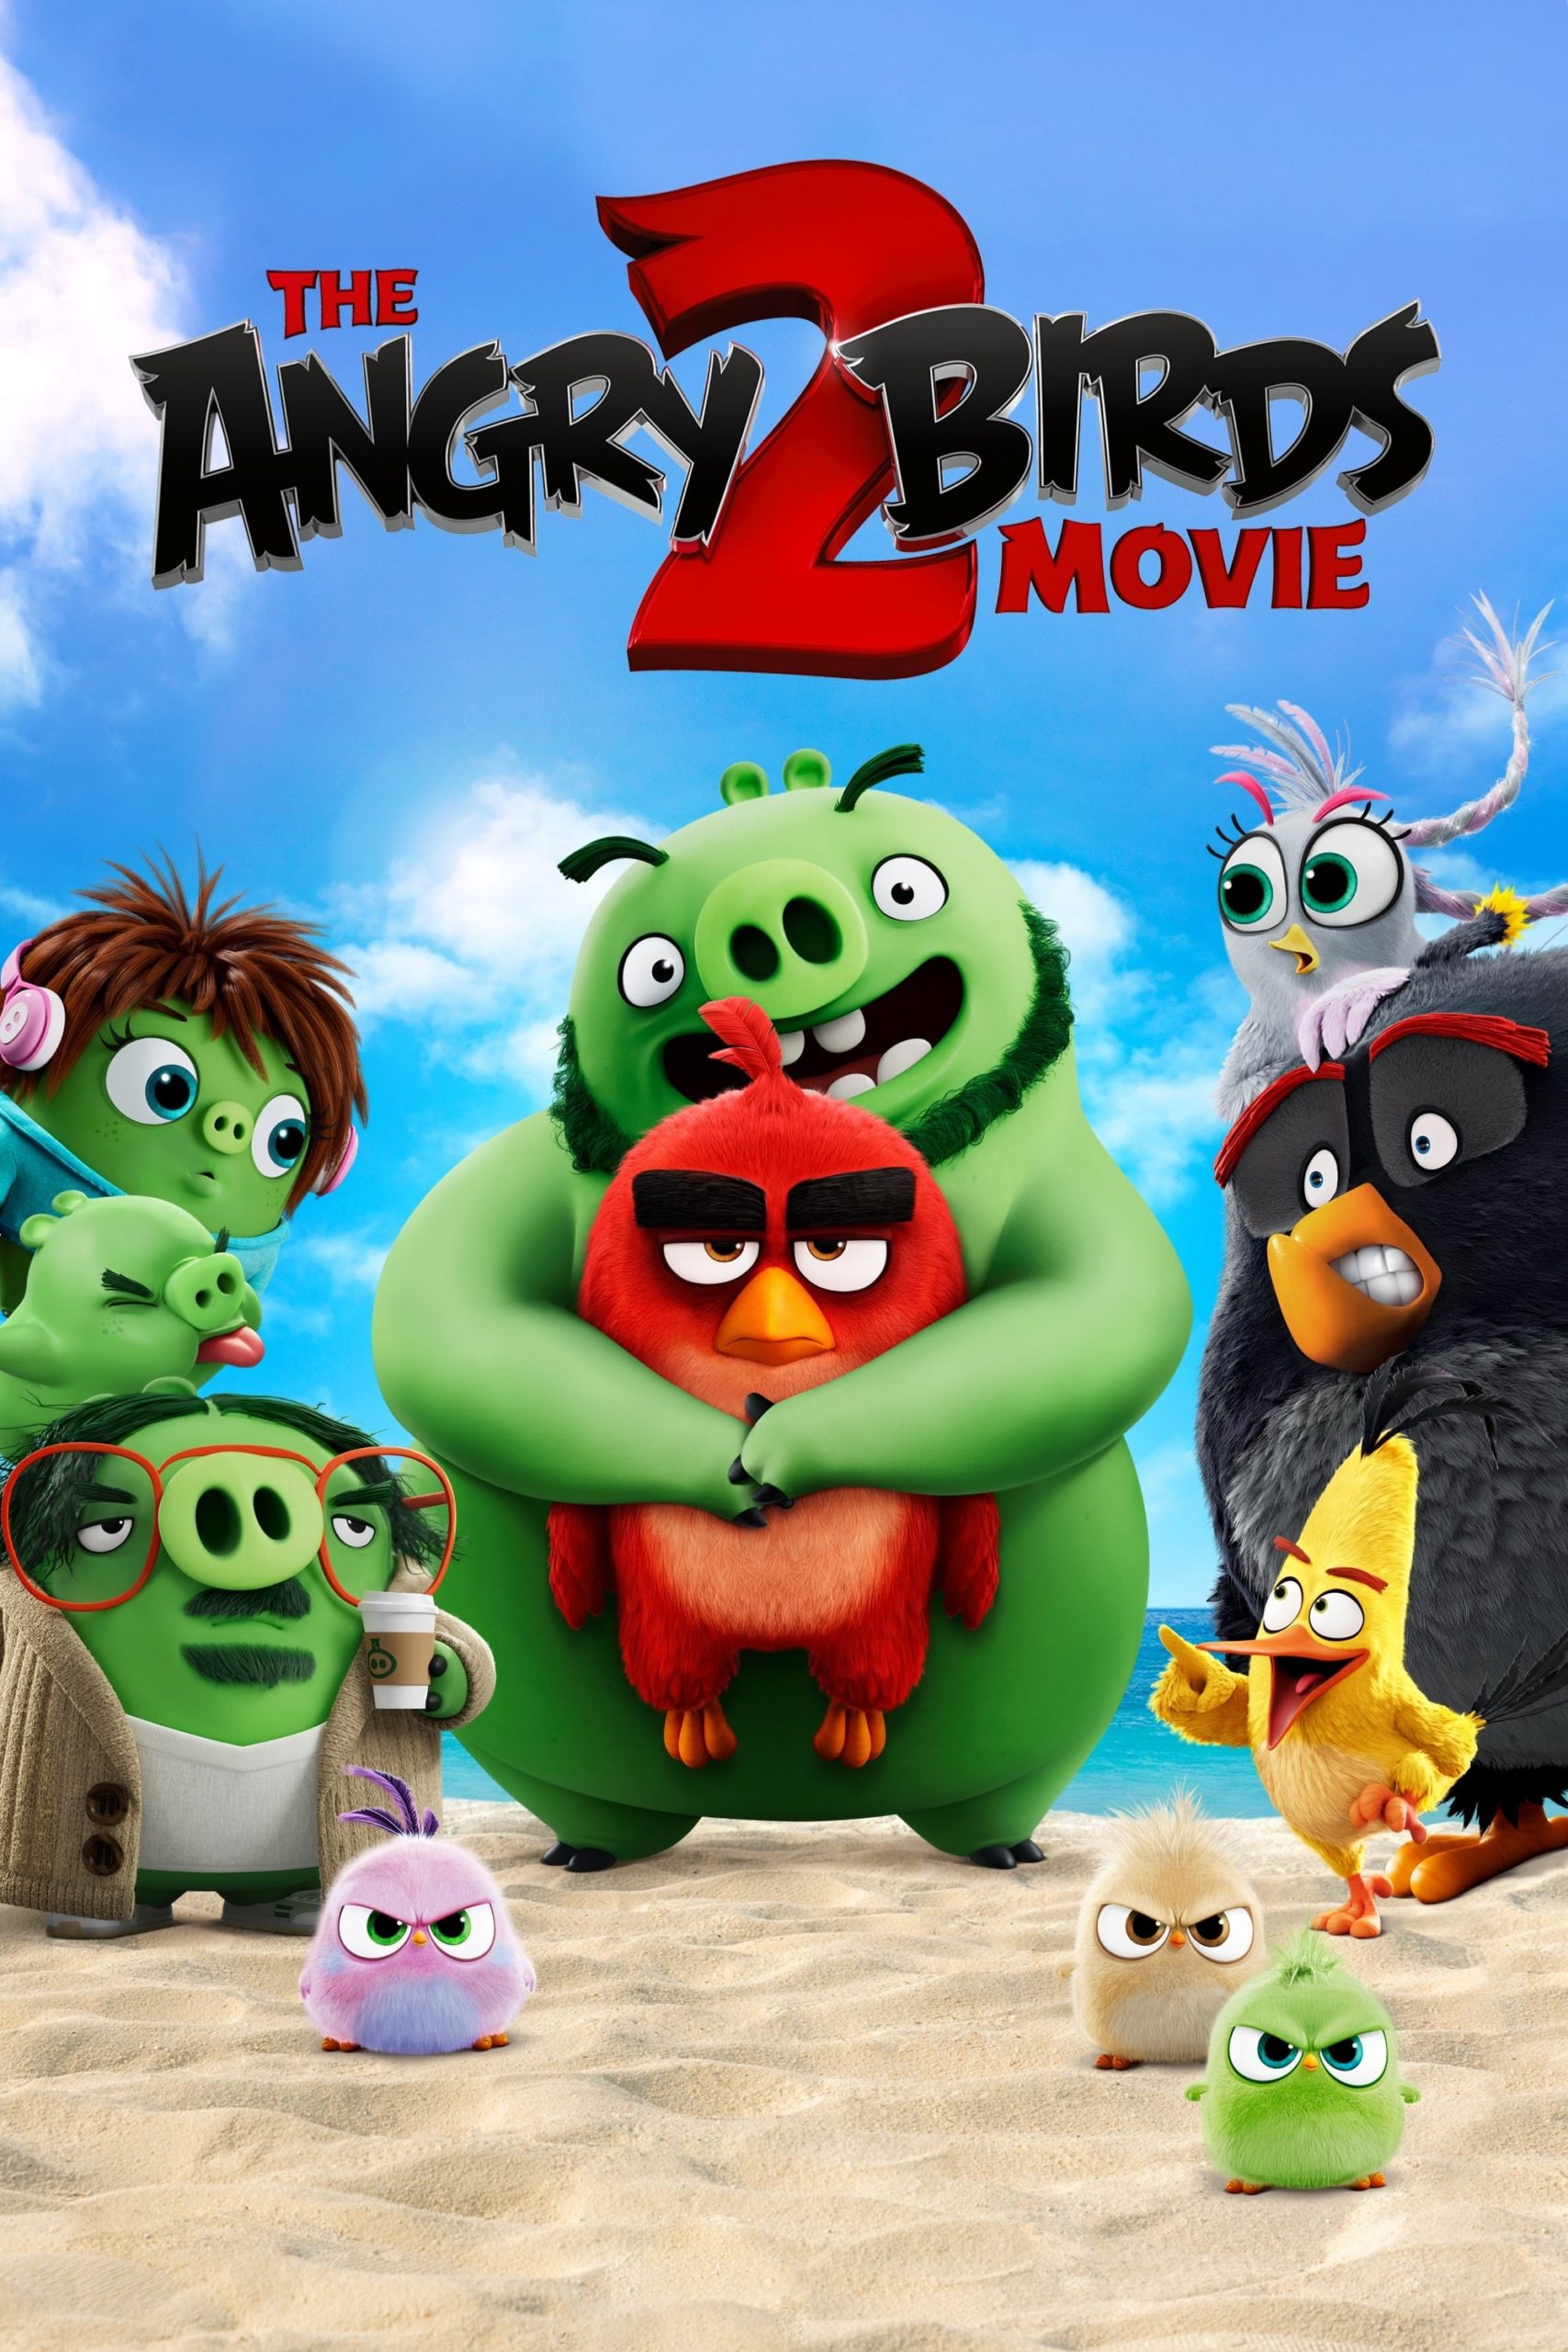 Poster for the movie "The Angry Birds Movie 2"